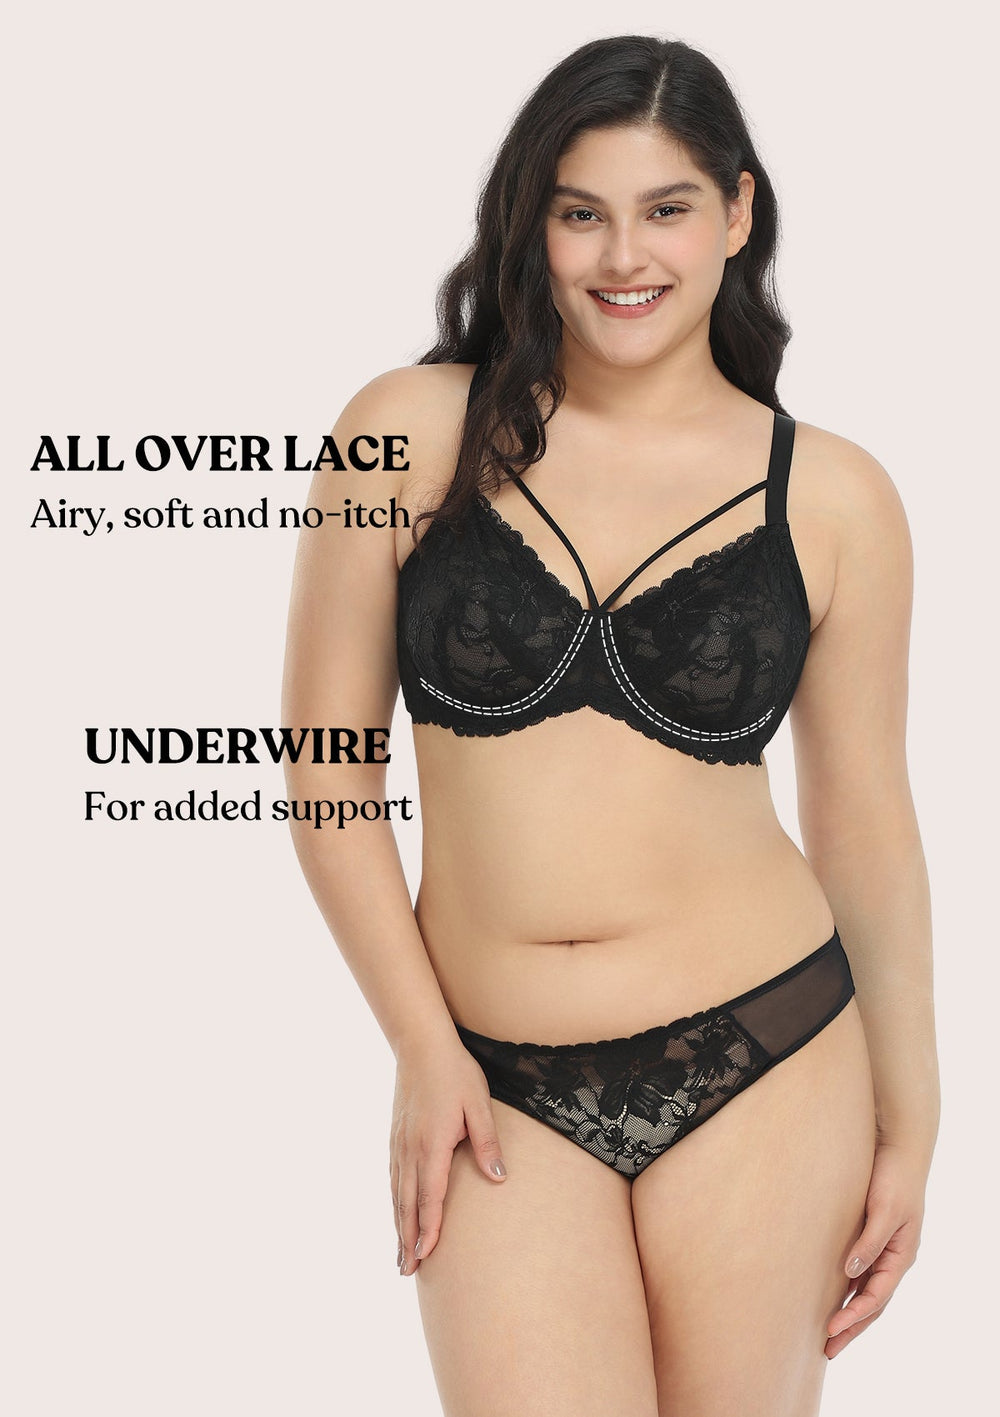 Baroque Lace Bras (2 pack) - Black and nude Cafe Latte